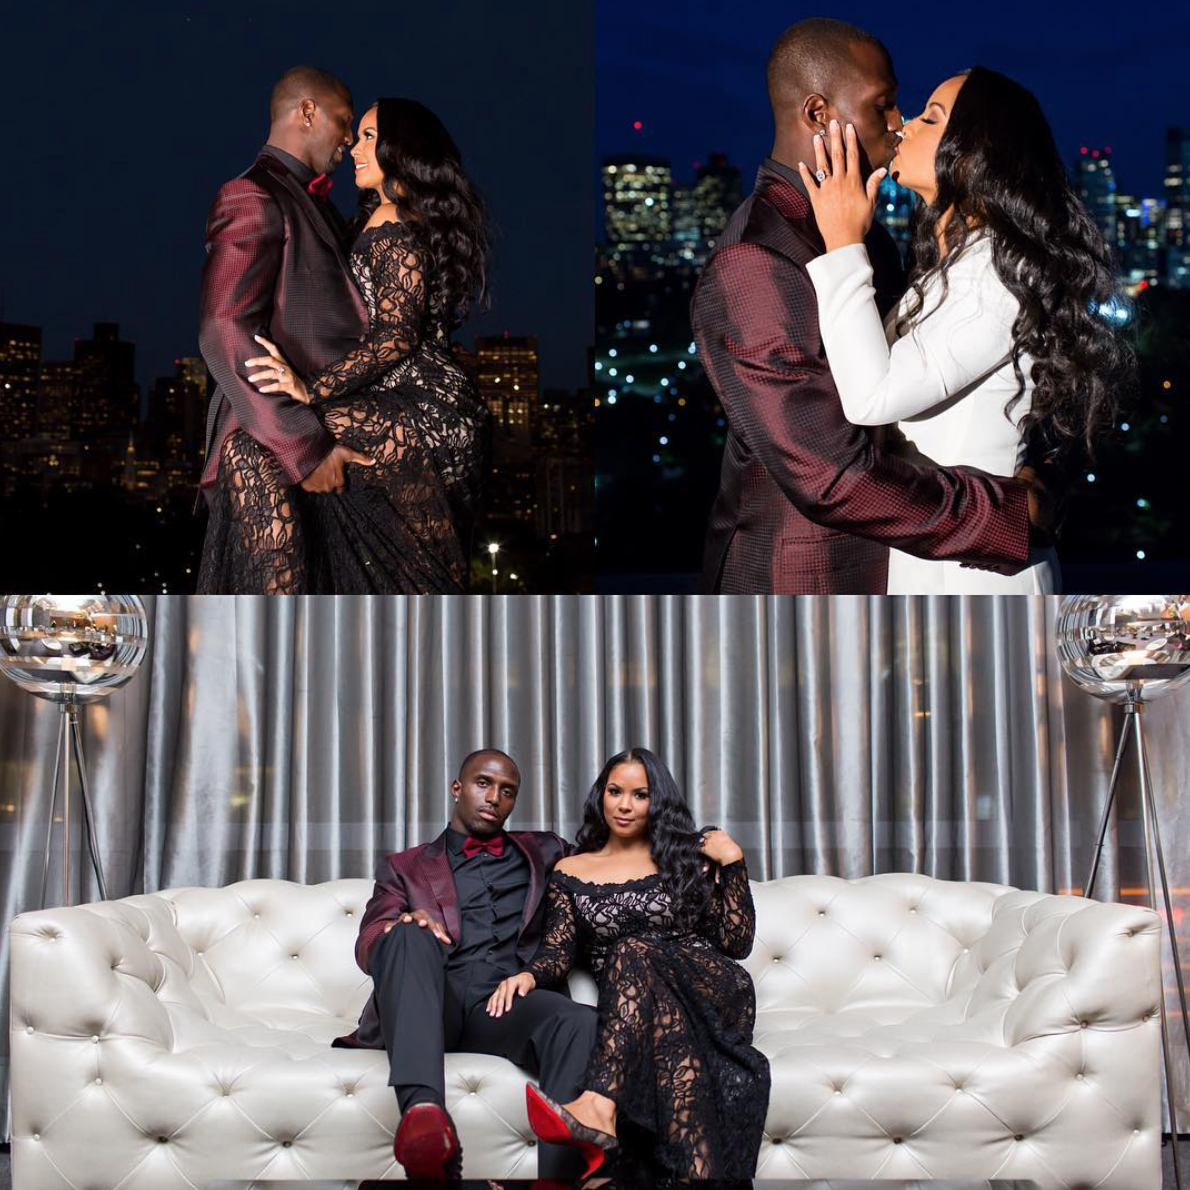 14 Times The NFL'S McCourty Twins and Their Wives Are So Cute
